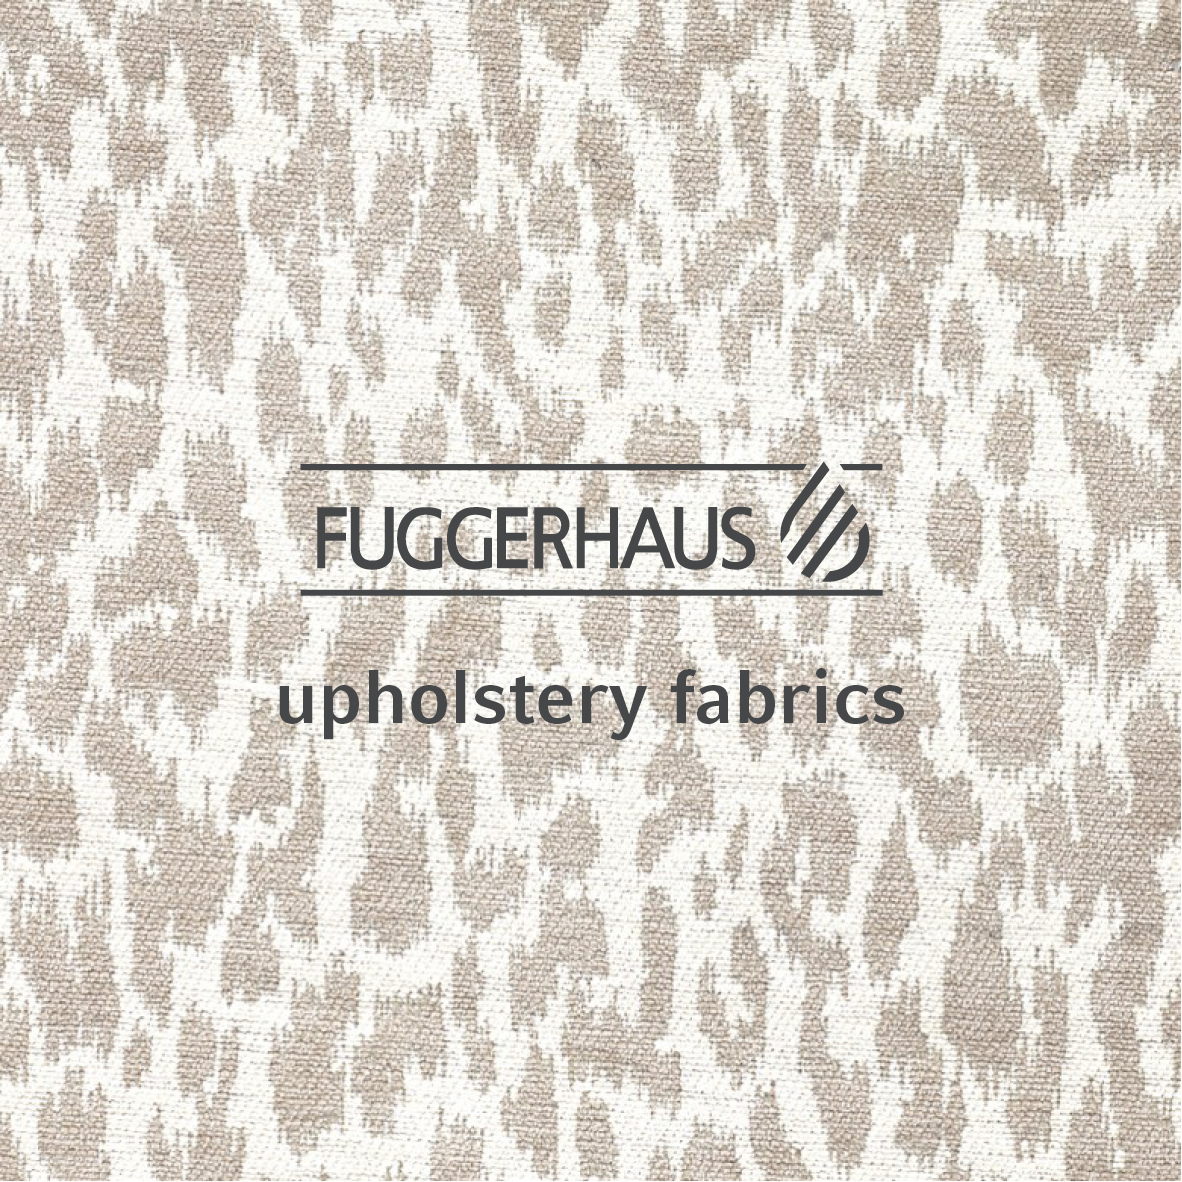 Fuggerhaus upholstery collections